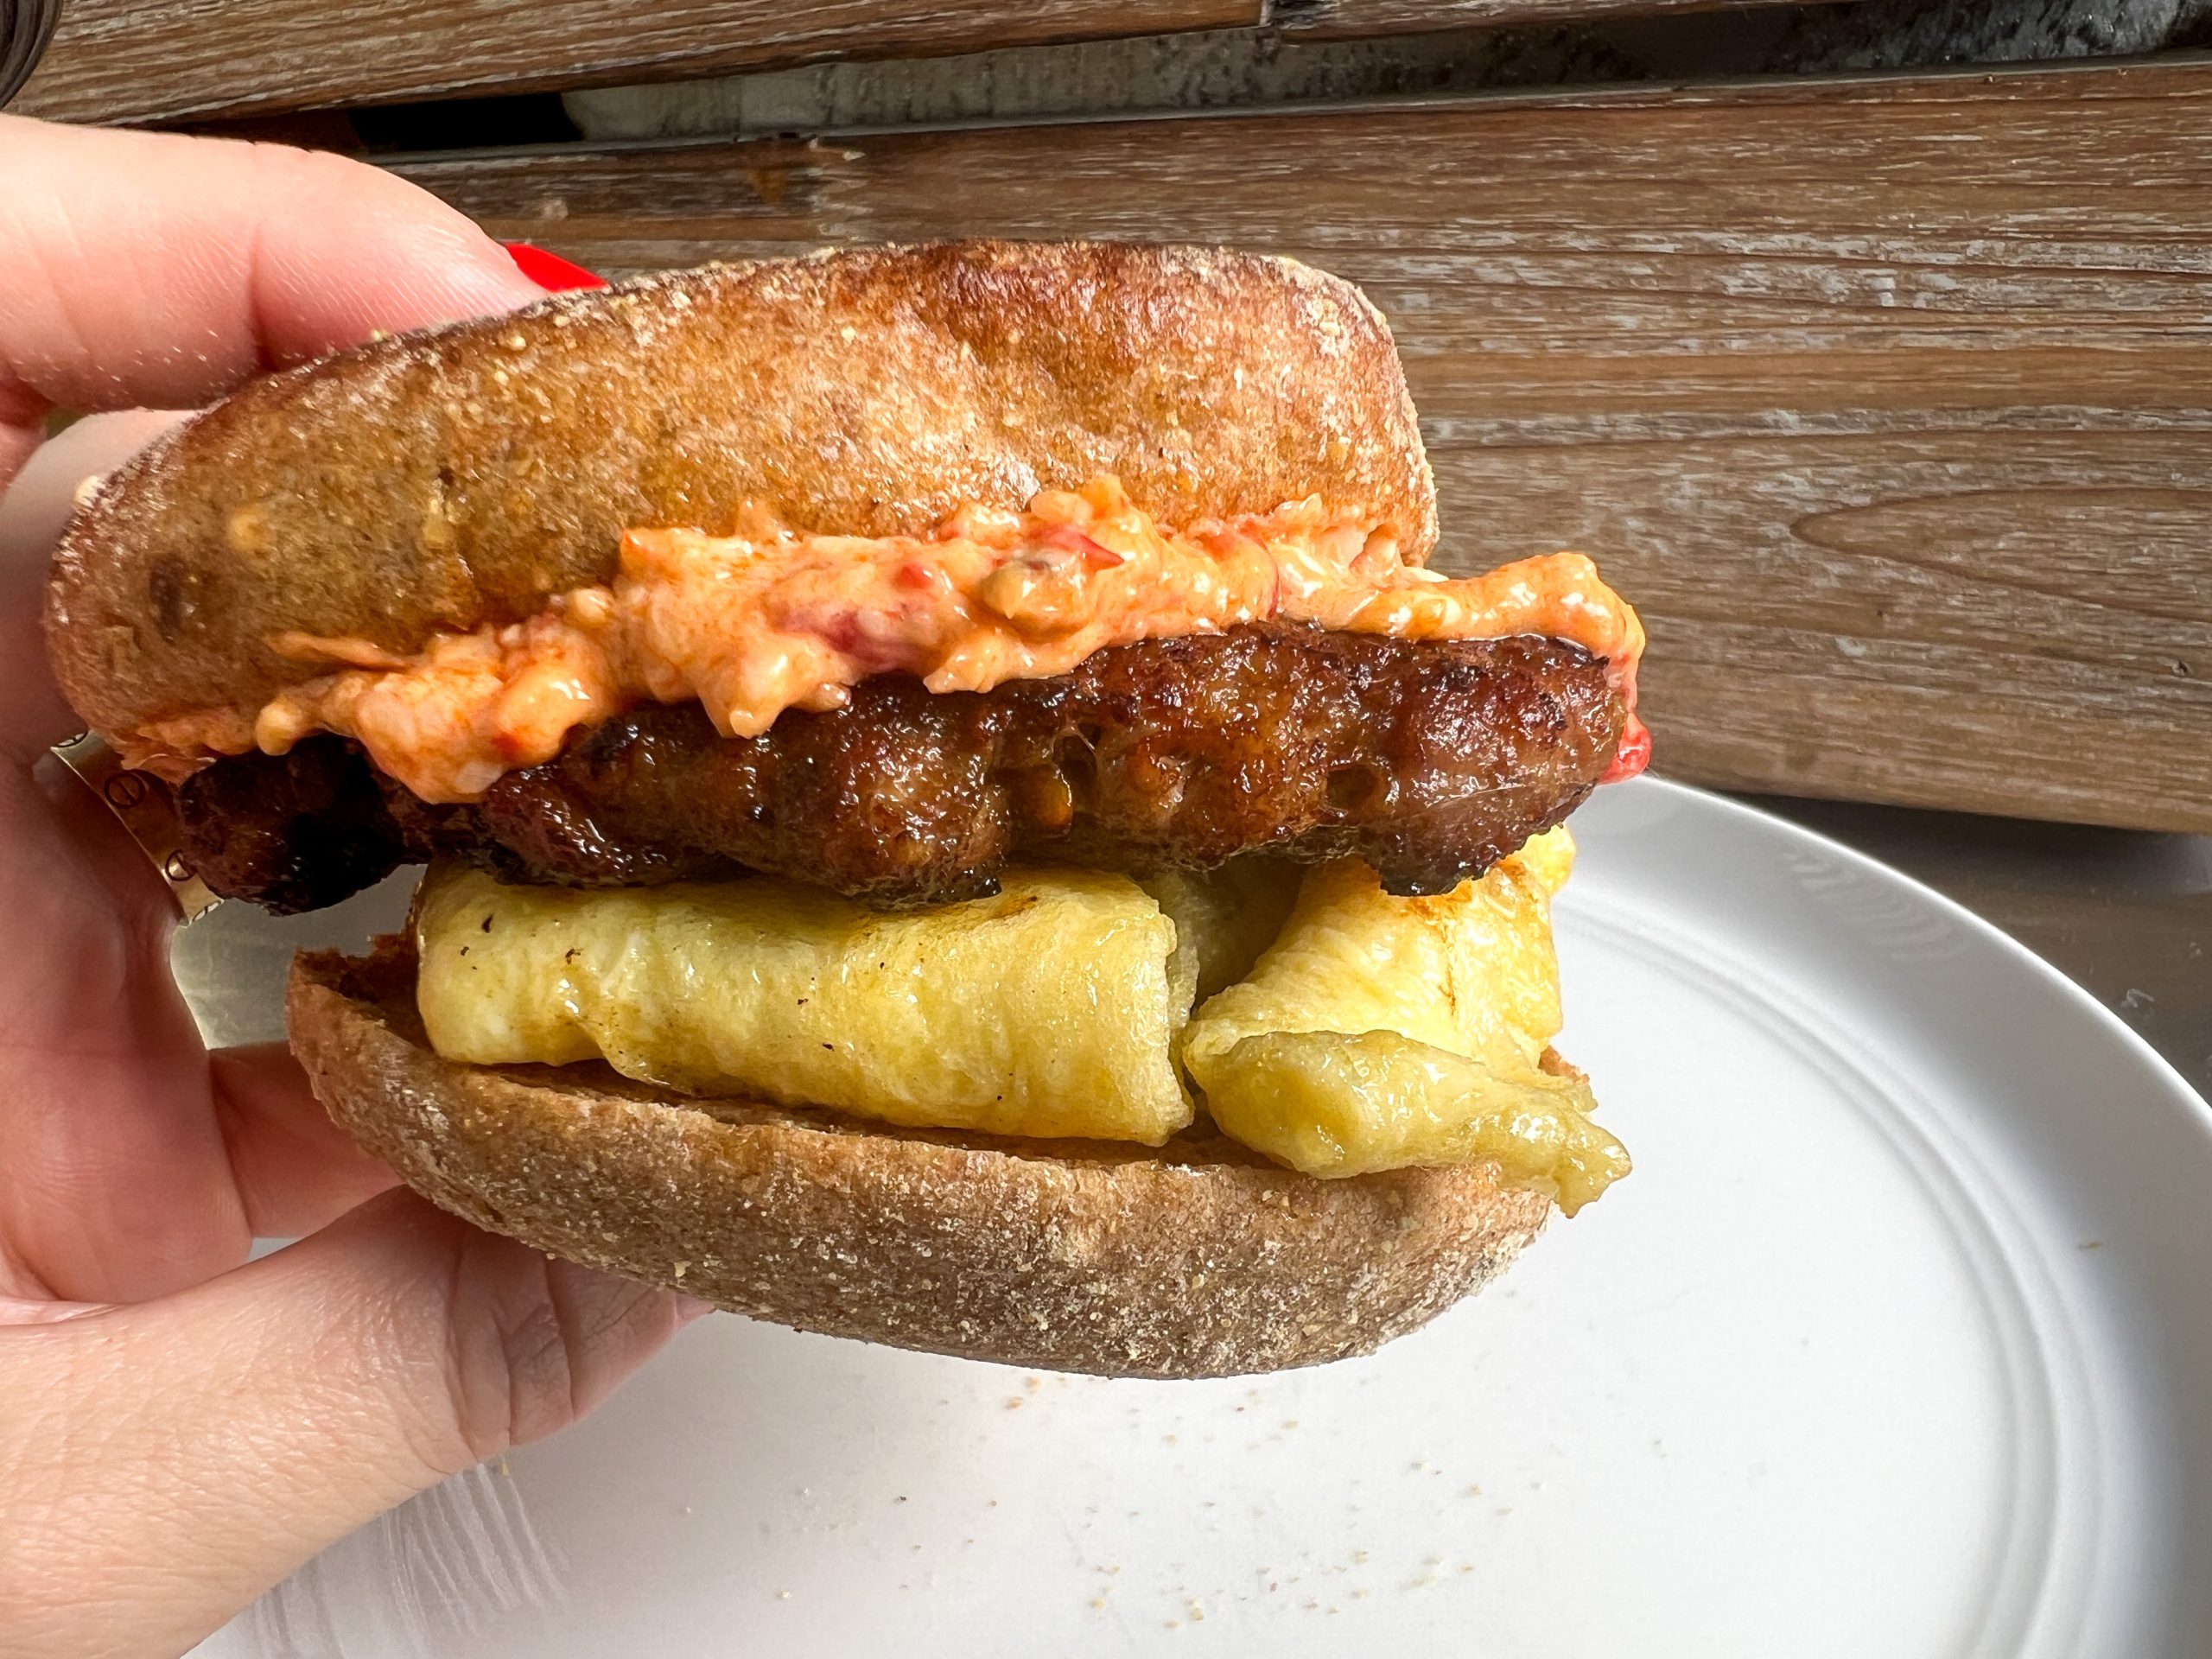 Sausage patty, egg and pimento cheese on an english muffin